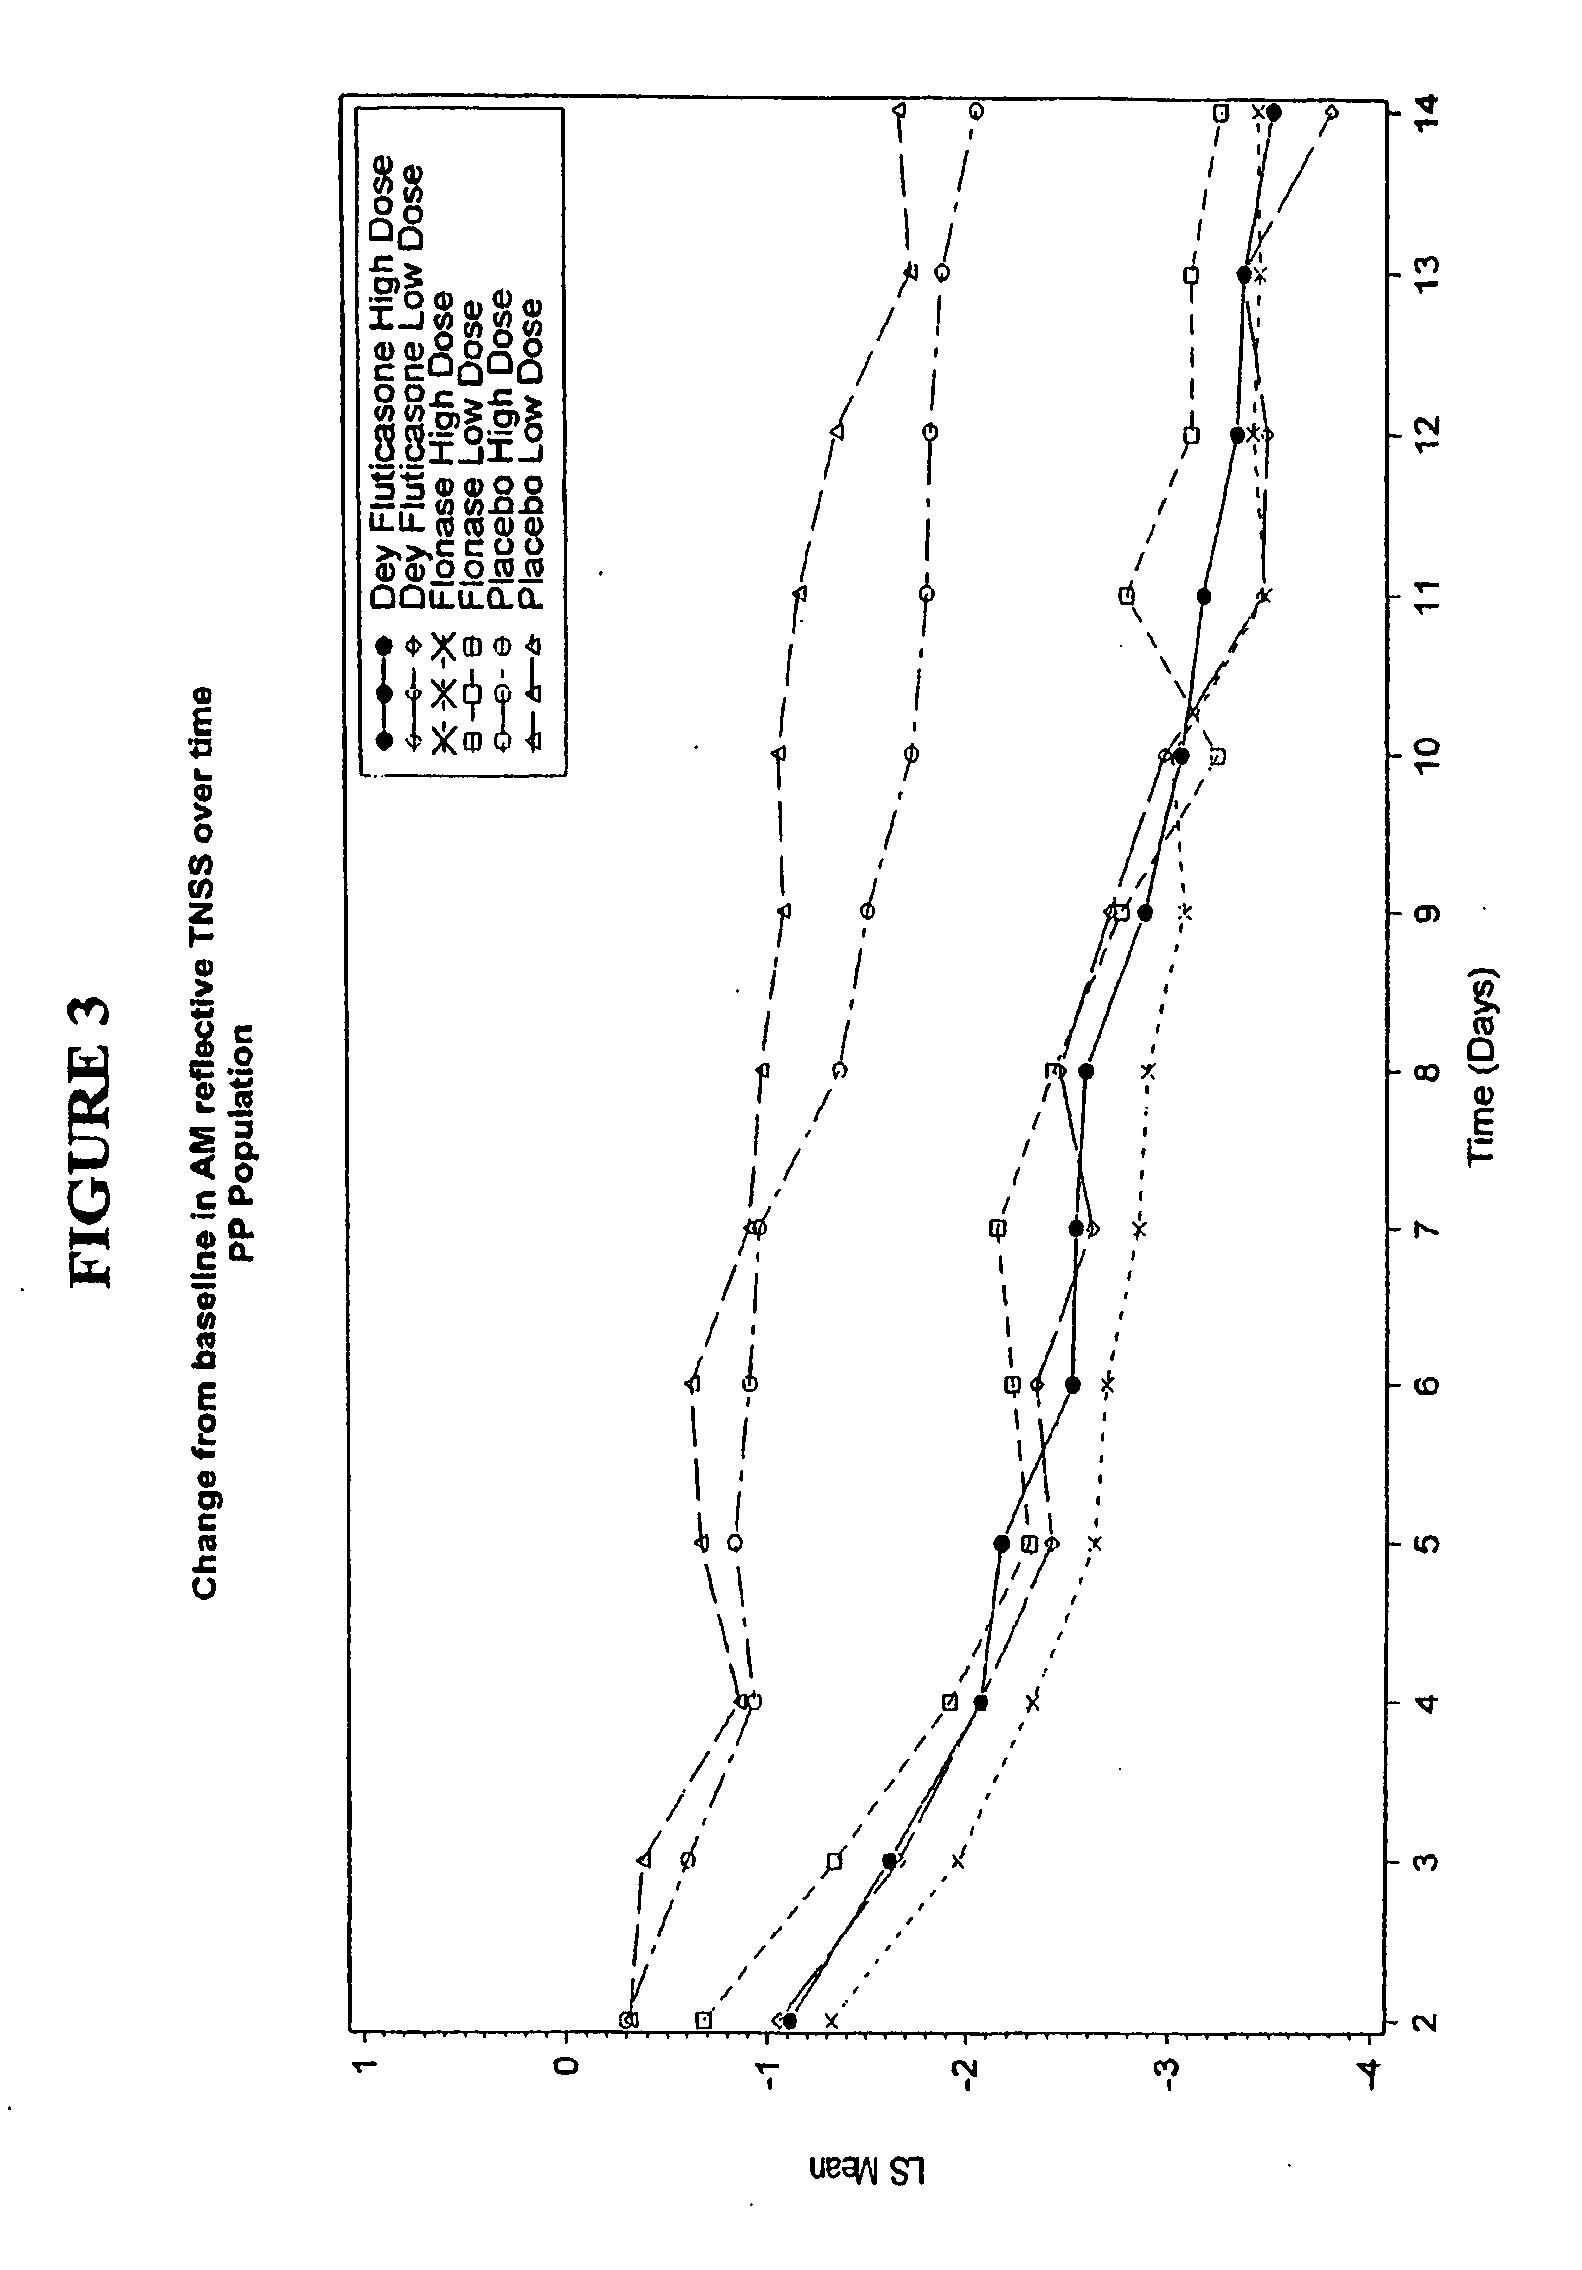 Nasal pharmaceutical formulations and methods of using the same